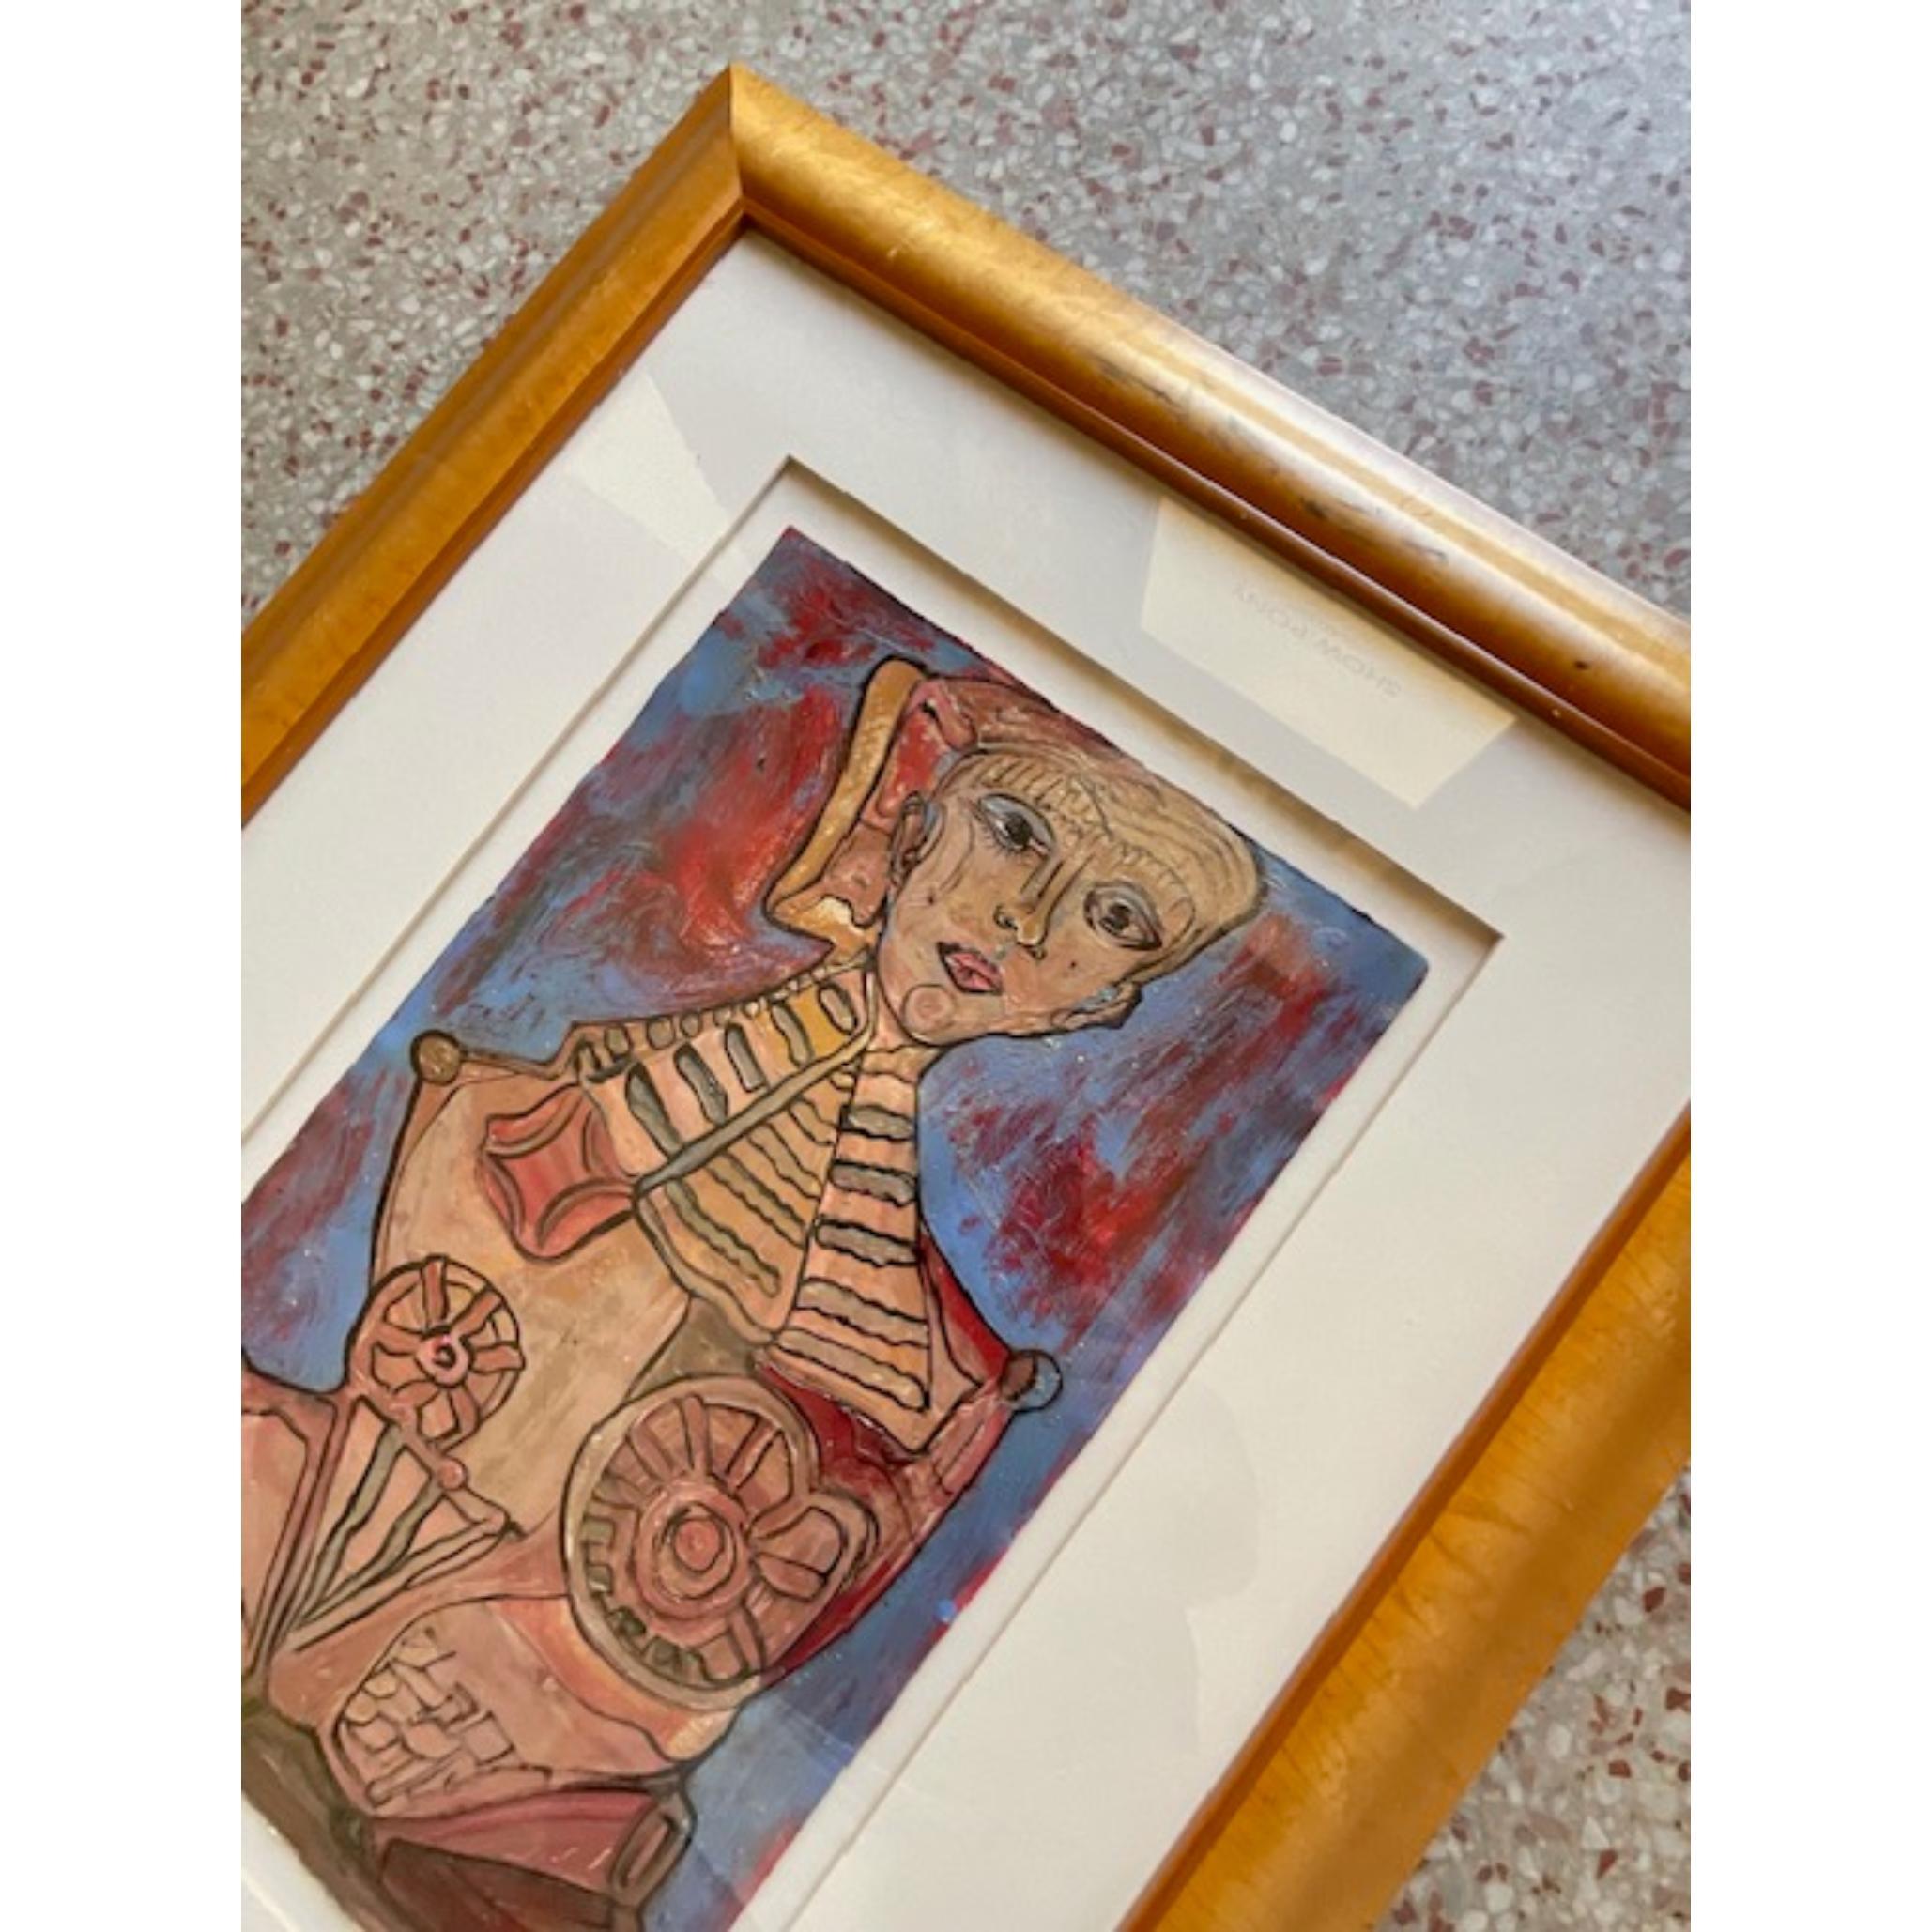 A striking vintage Boho original oil painting on paper. A chic Abstract Figural of a woman. Signed and dated by the artist 1980. Acquired from a Miami estate.